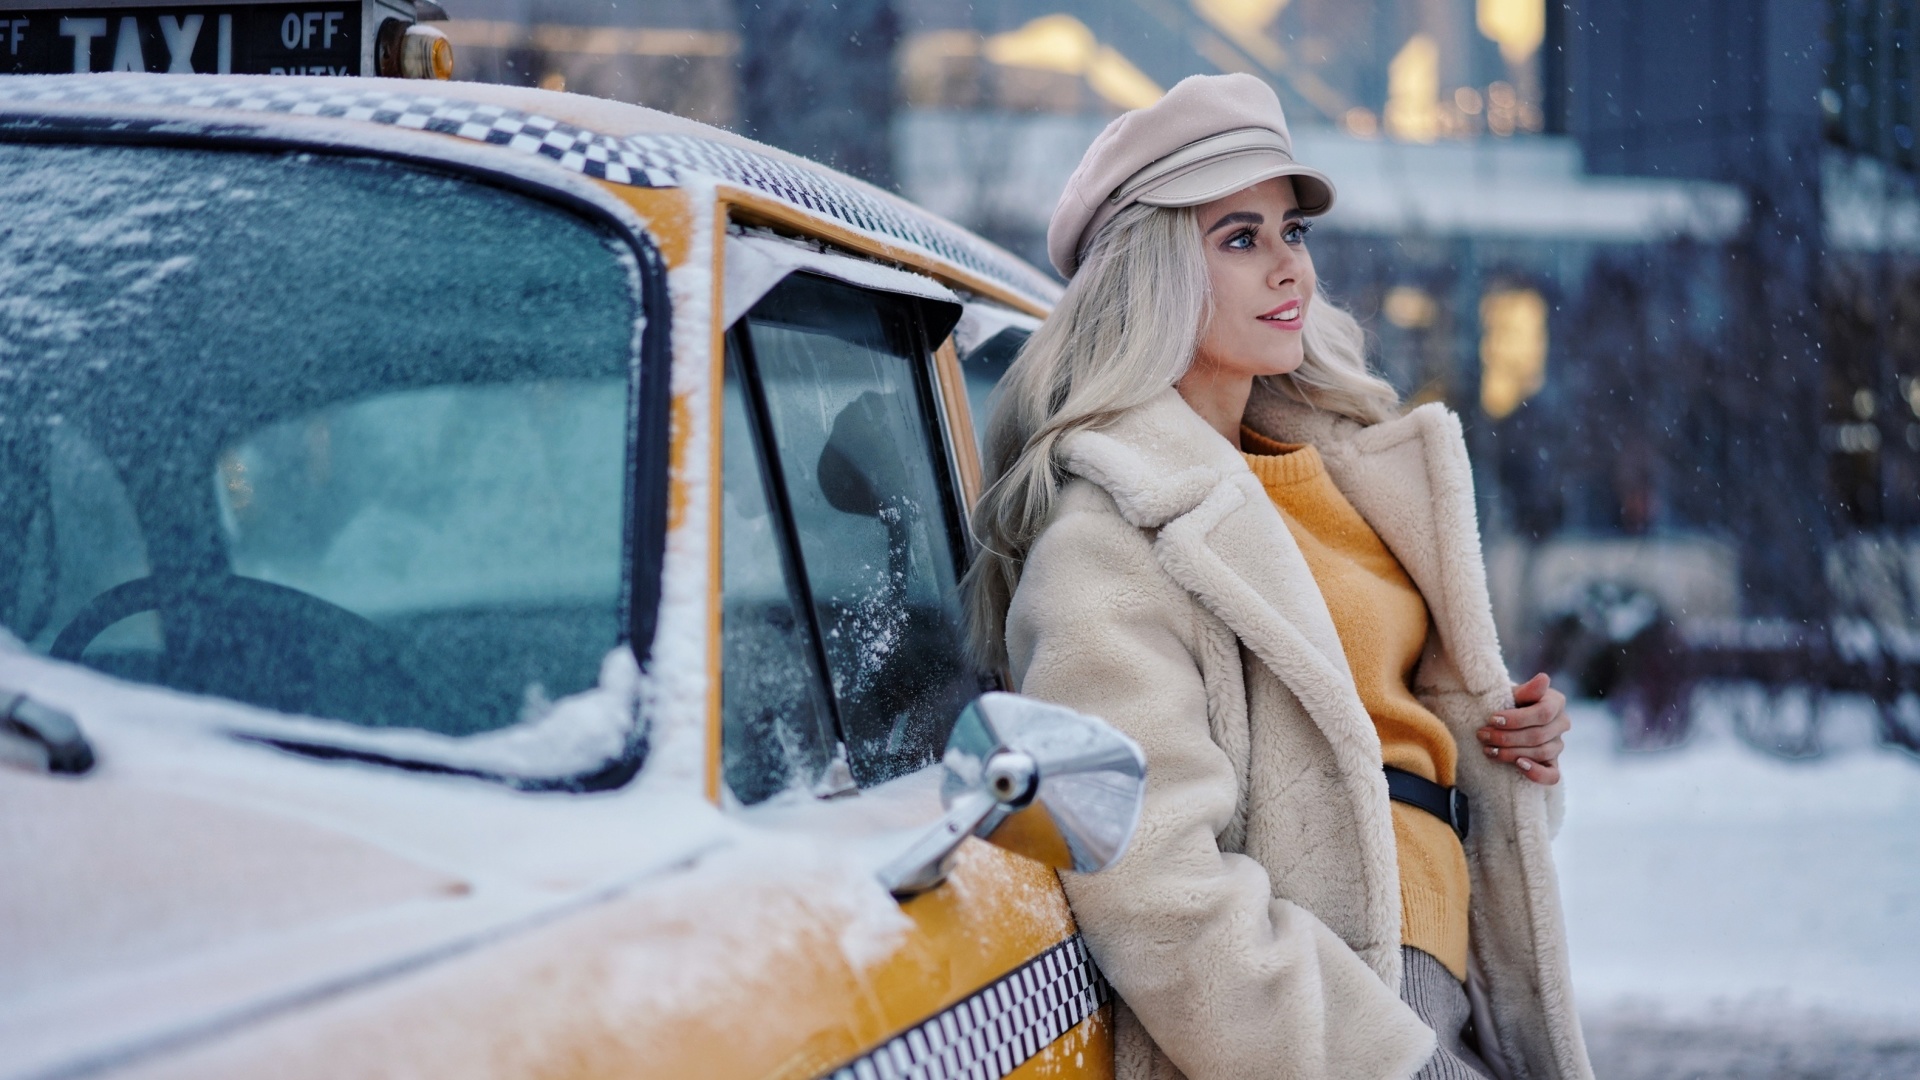 Winter Girl and Taxi wallpaper 1920x1080